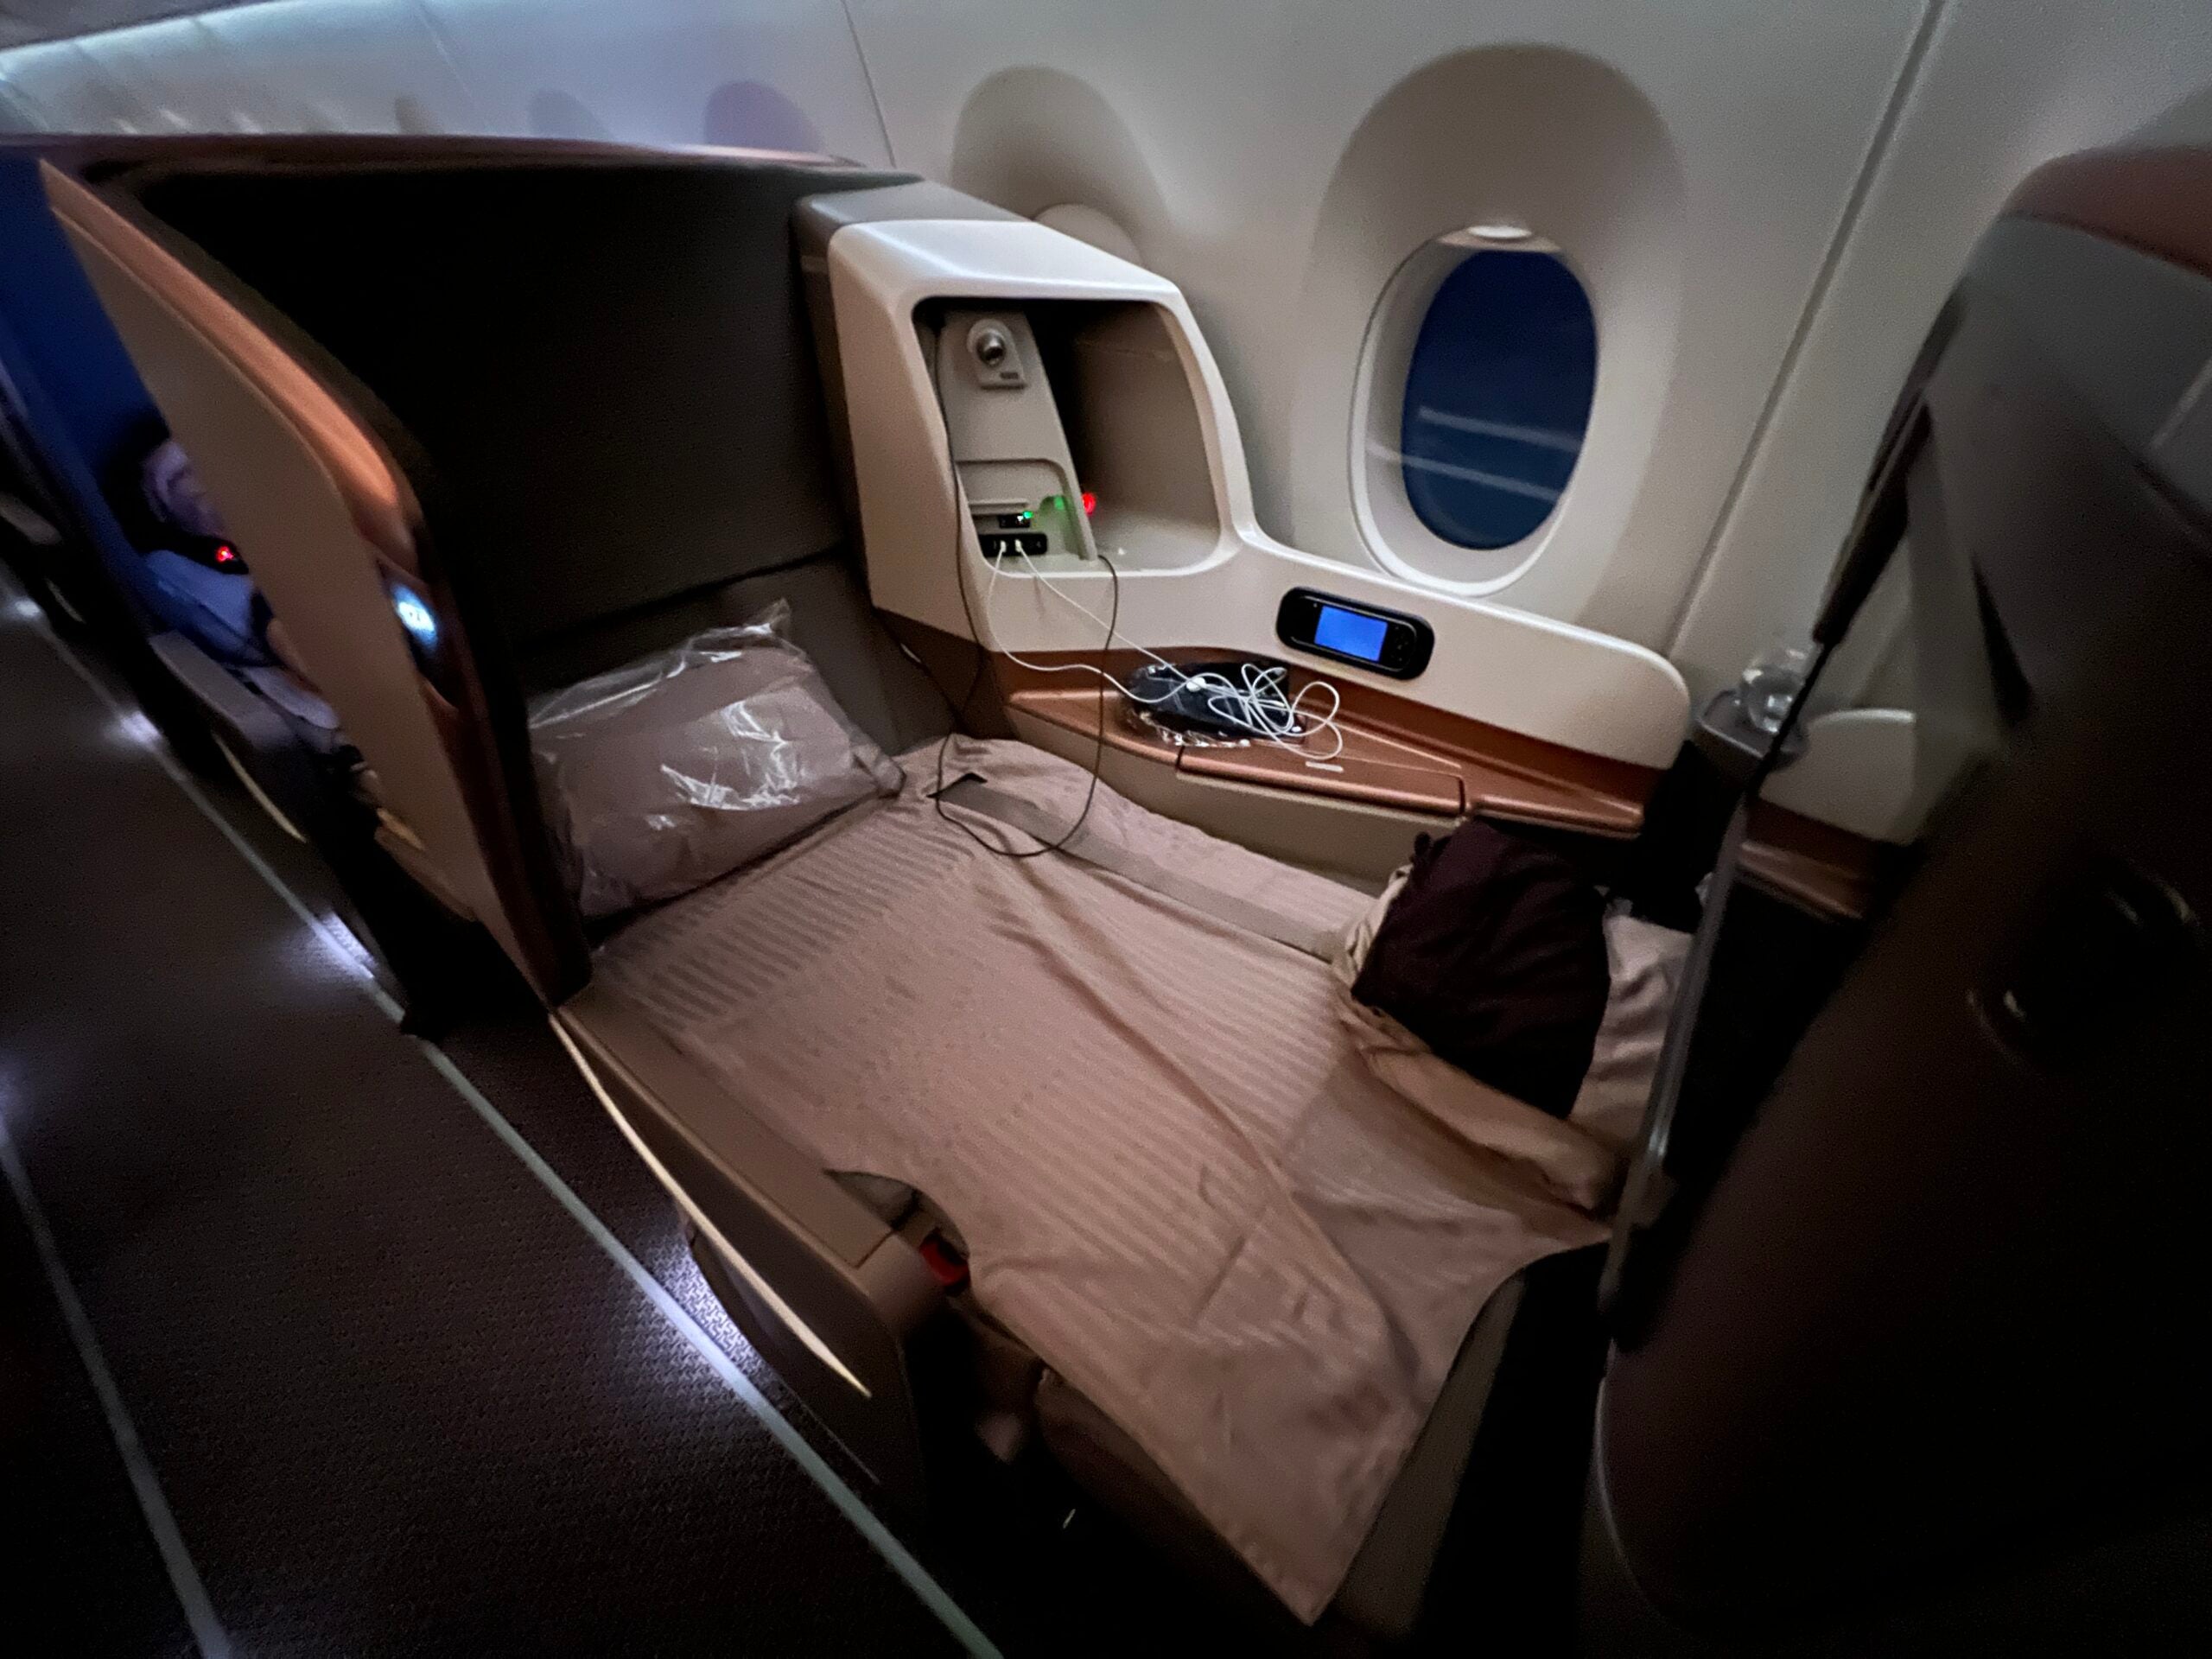 7 takeaways from my 1st Singapore Airlines business-class experience - The Points Guy